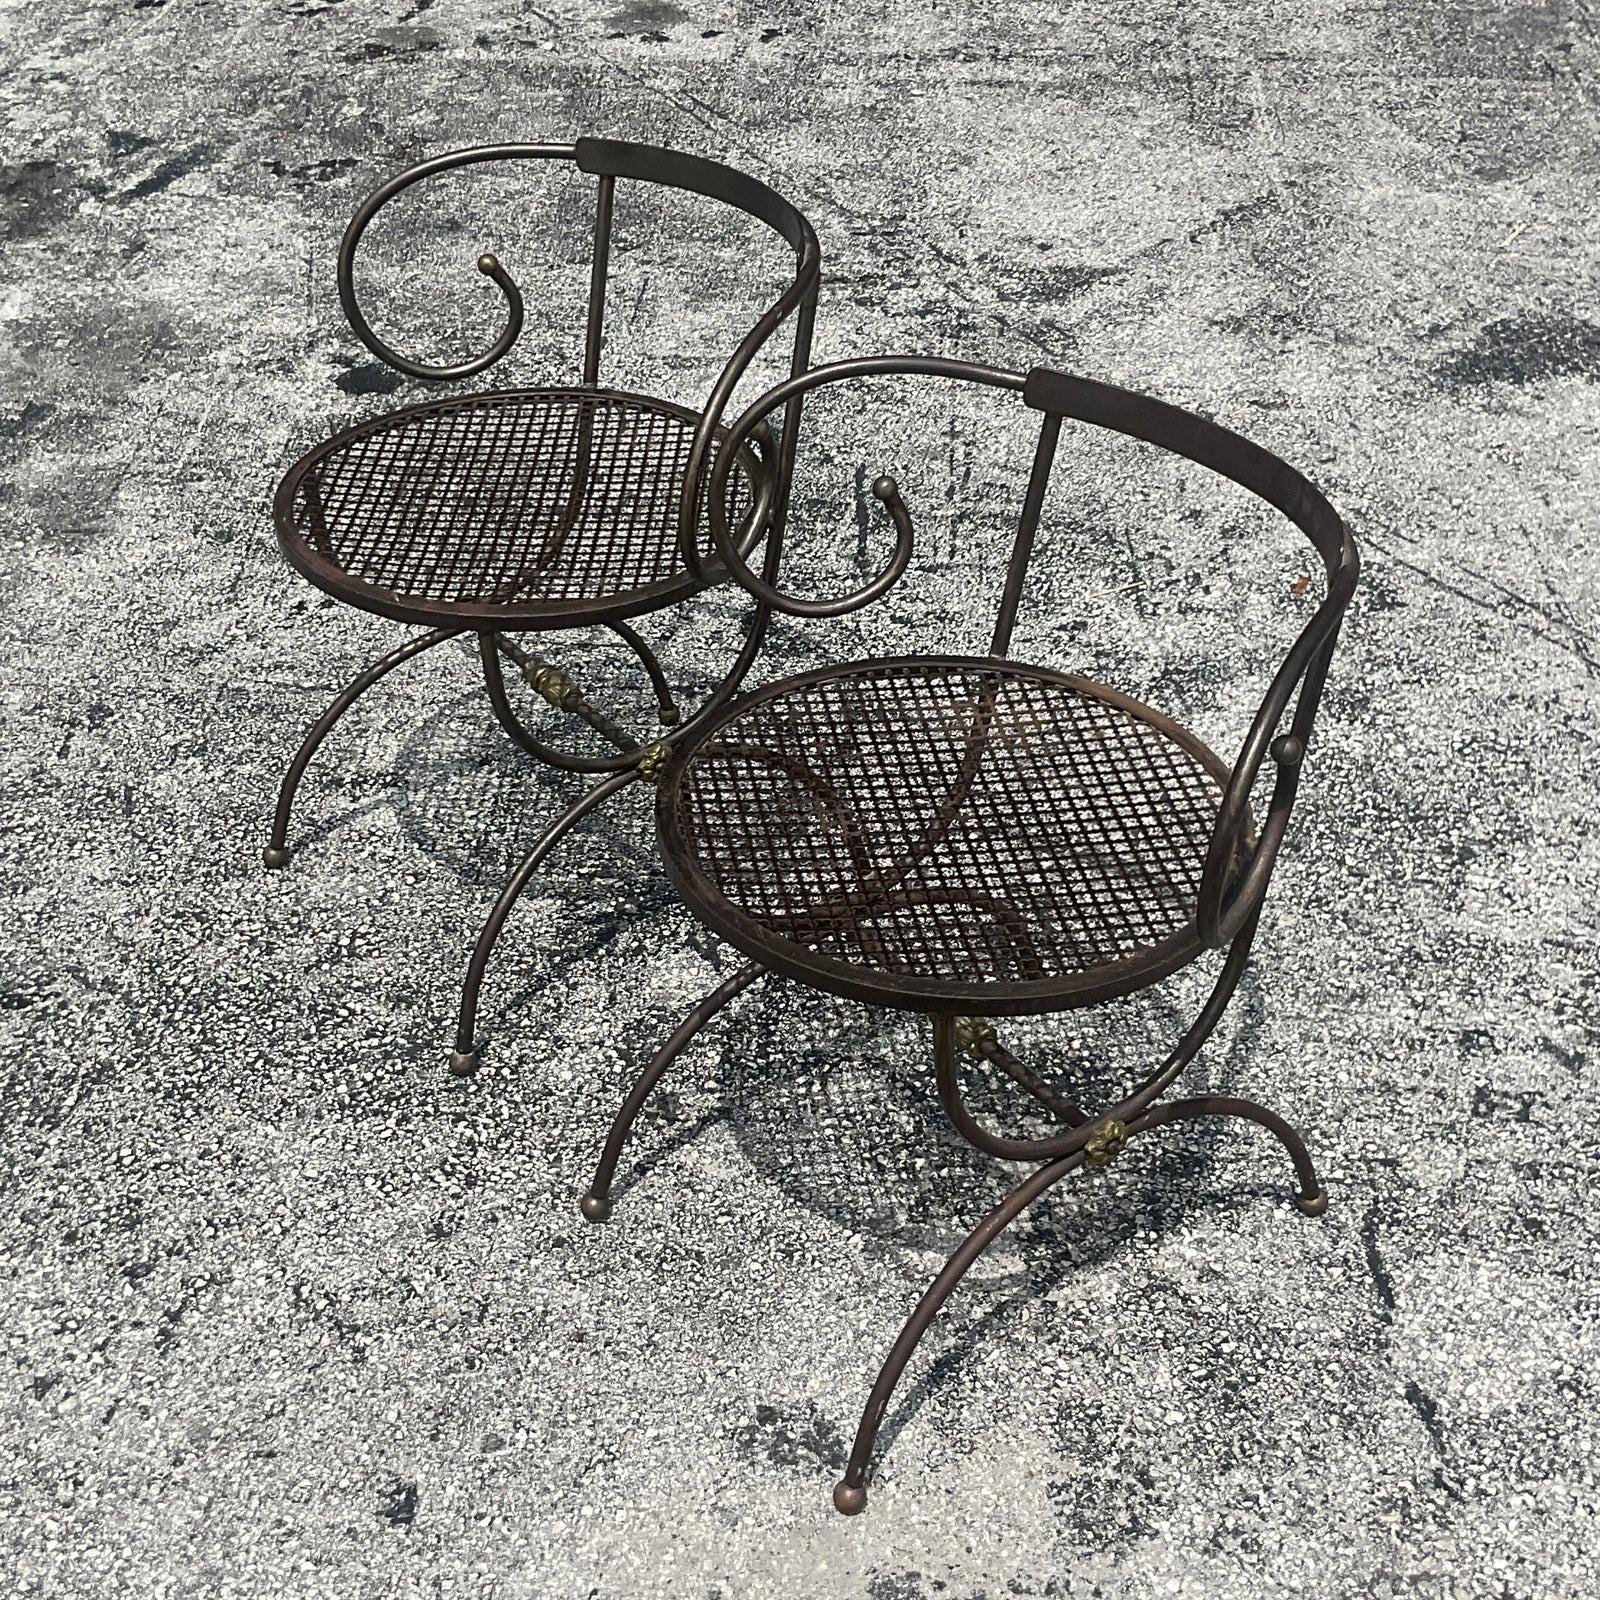 A fabulous pair of vintage Boho side chairs. A chic metal construction in a charming swirl design. Perfect indoors our outside. Acquired from a Palm Beach estate.